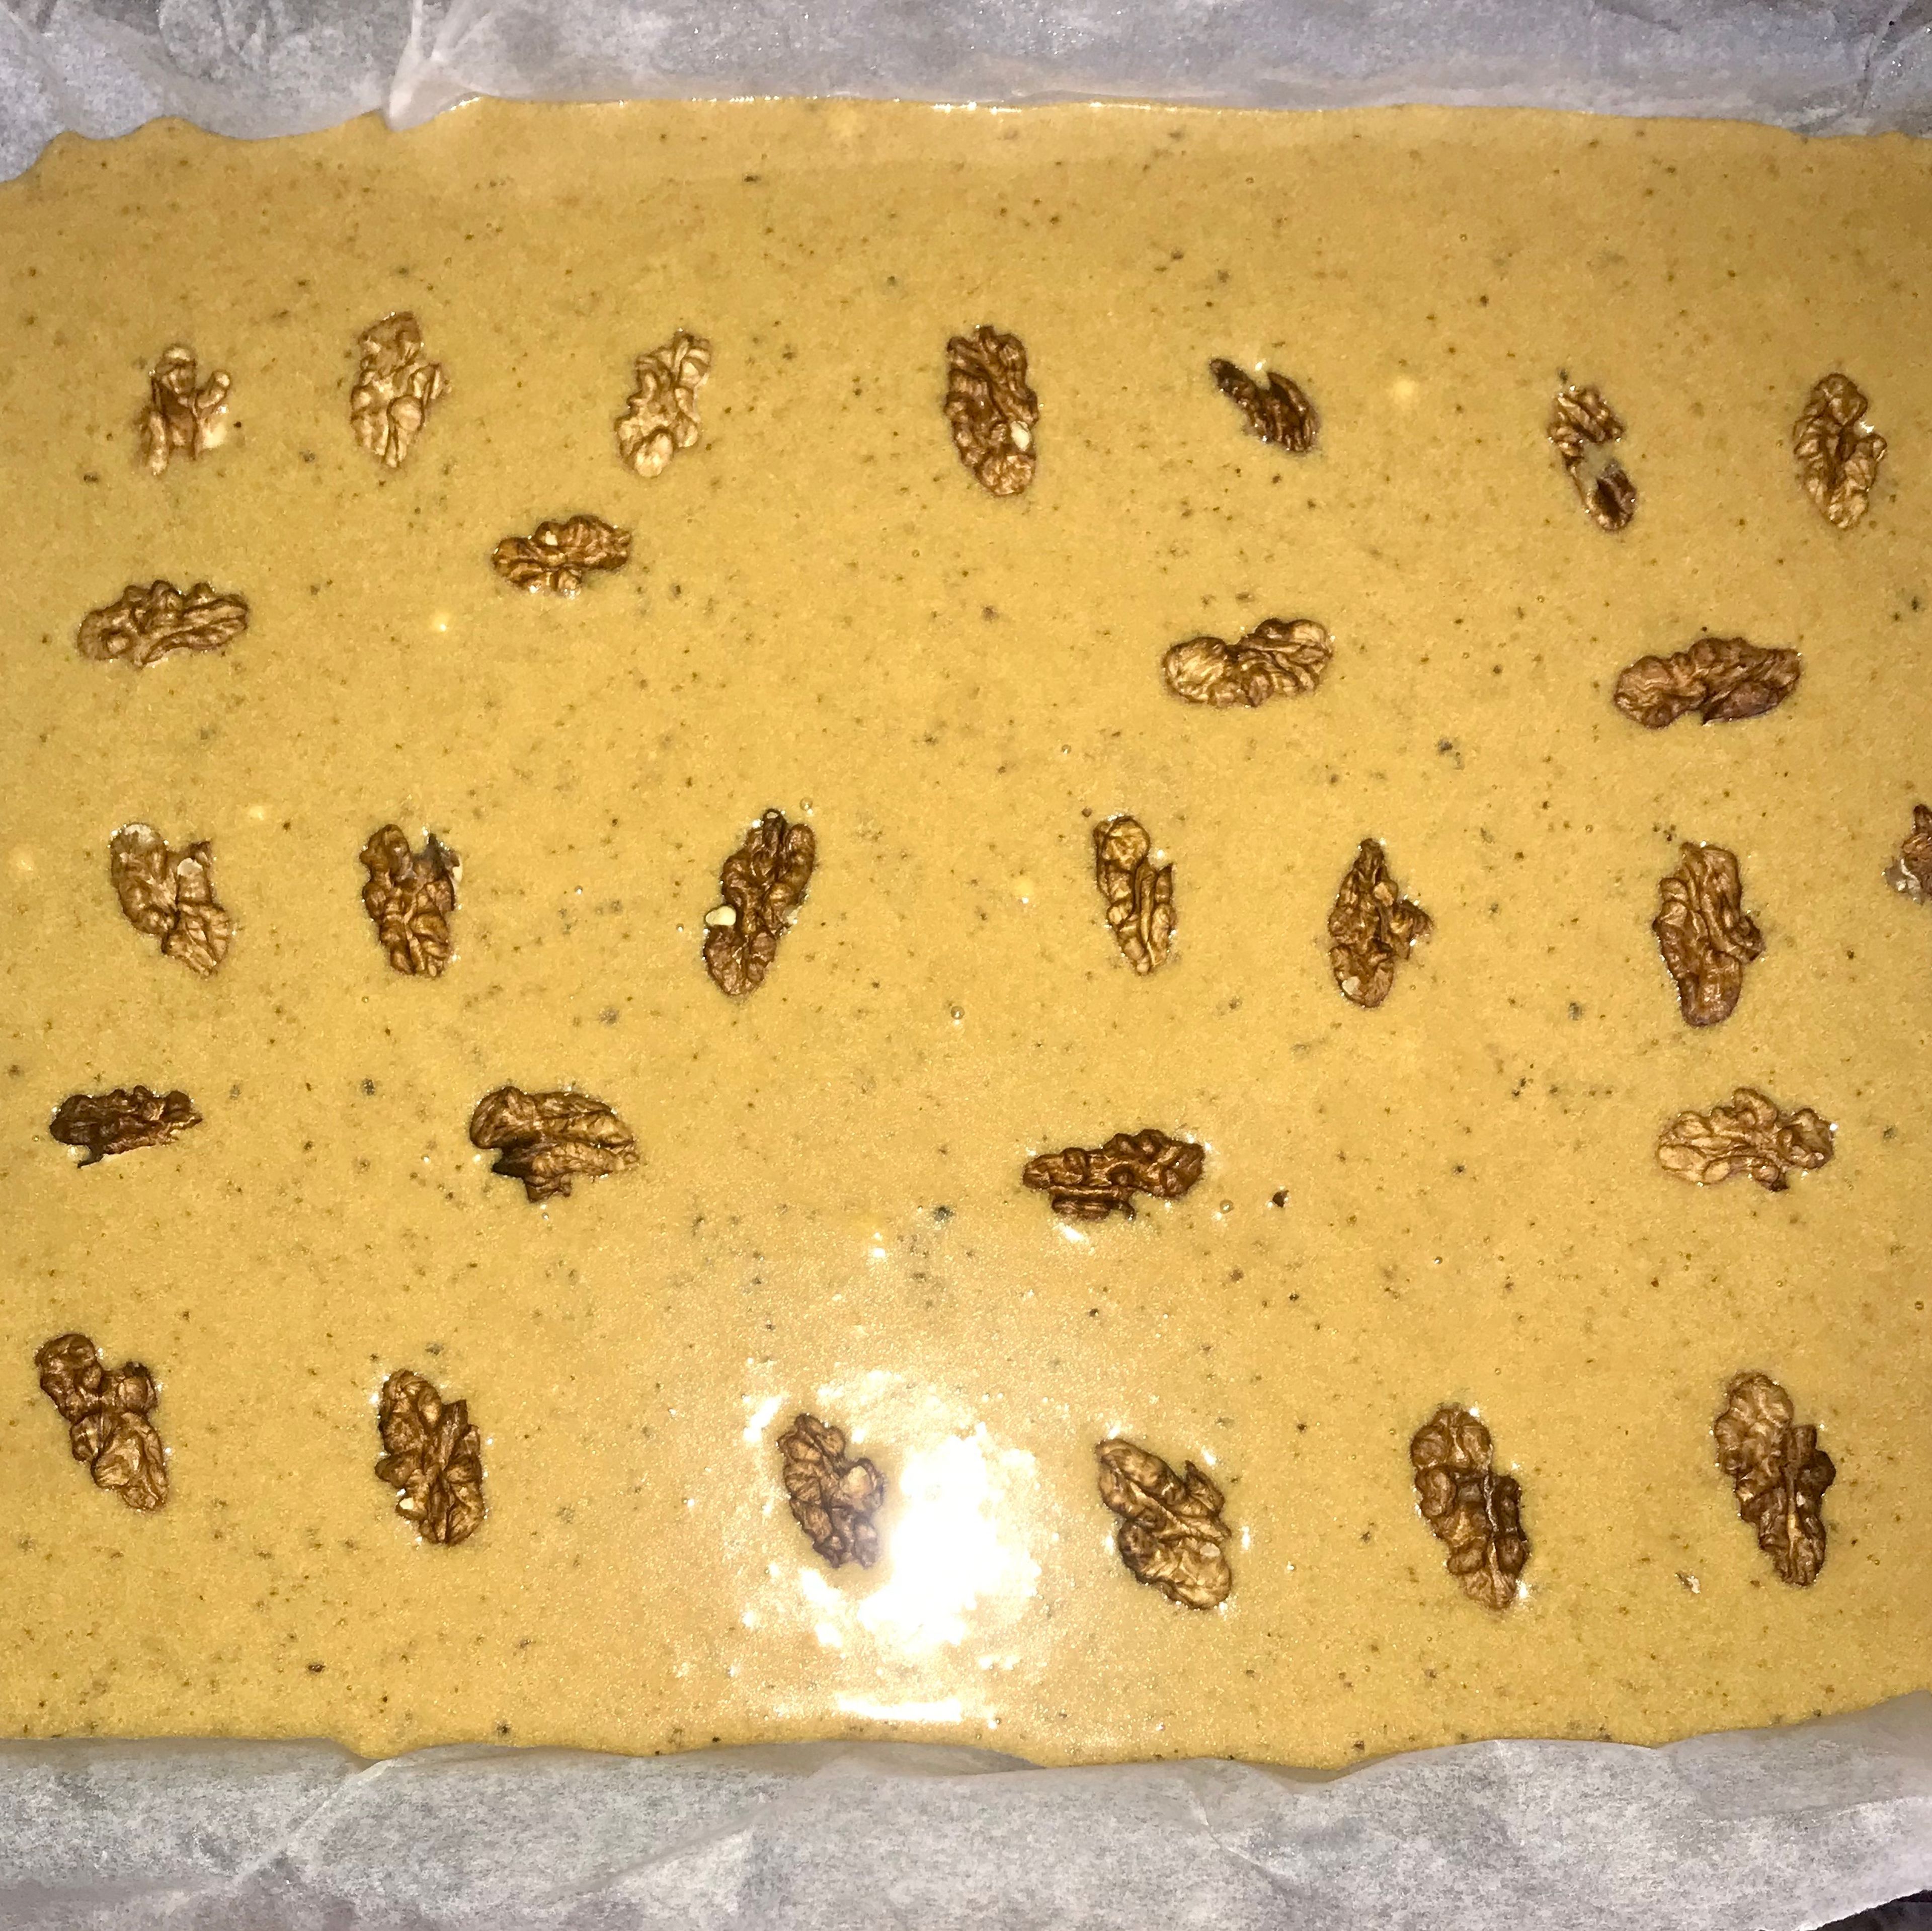 Spoon the mix into the tray and top it with the walnut halves. Then bake for 18-20 mins until light golden and springy. Cool for a few mins in the tin, then lift the cake out and cool on a rack.